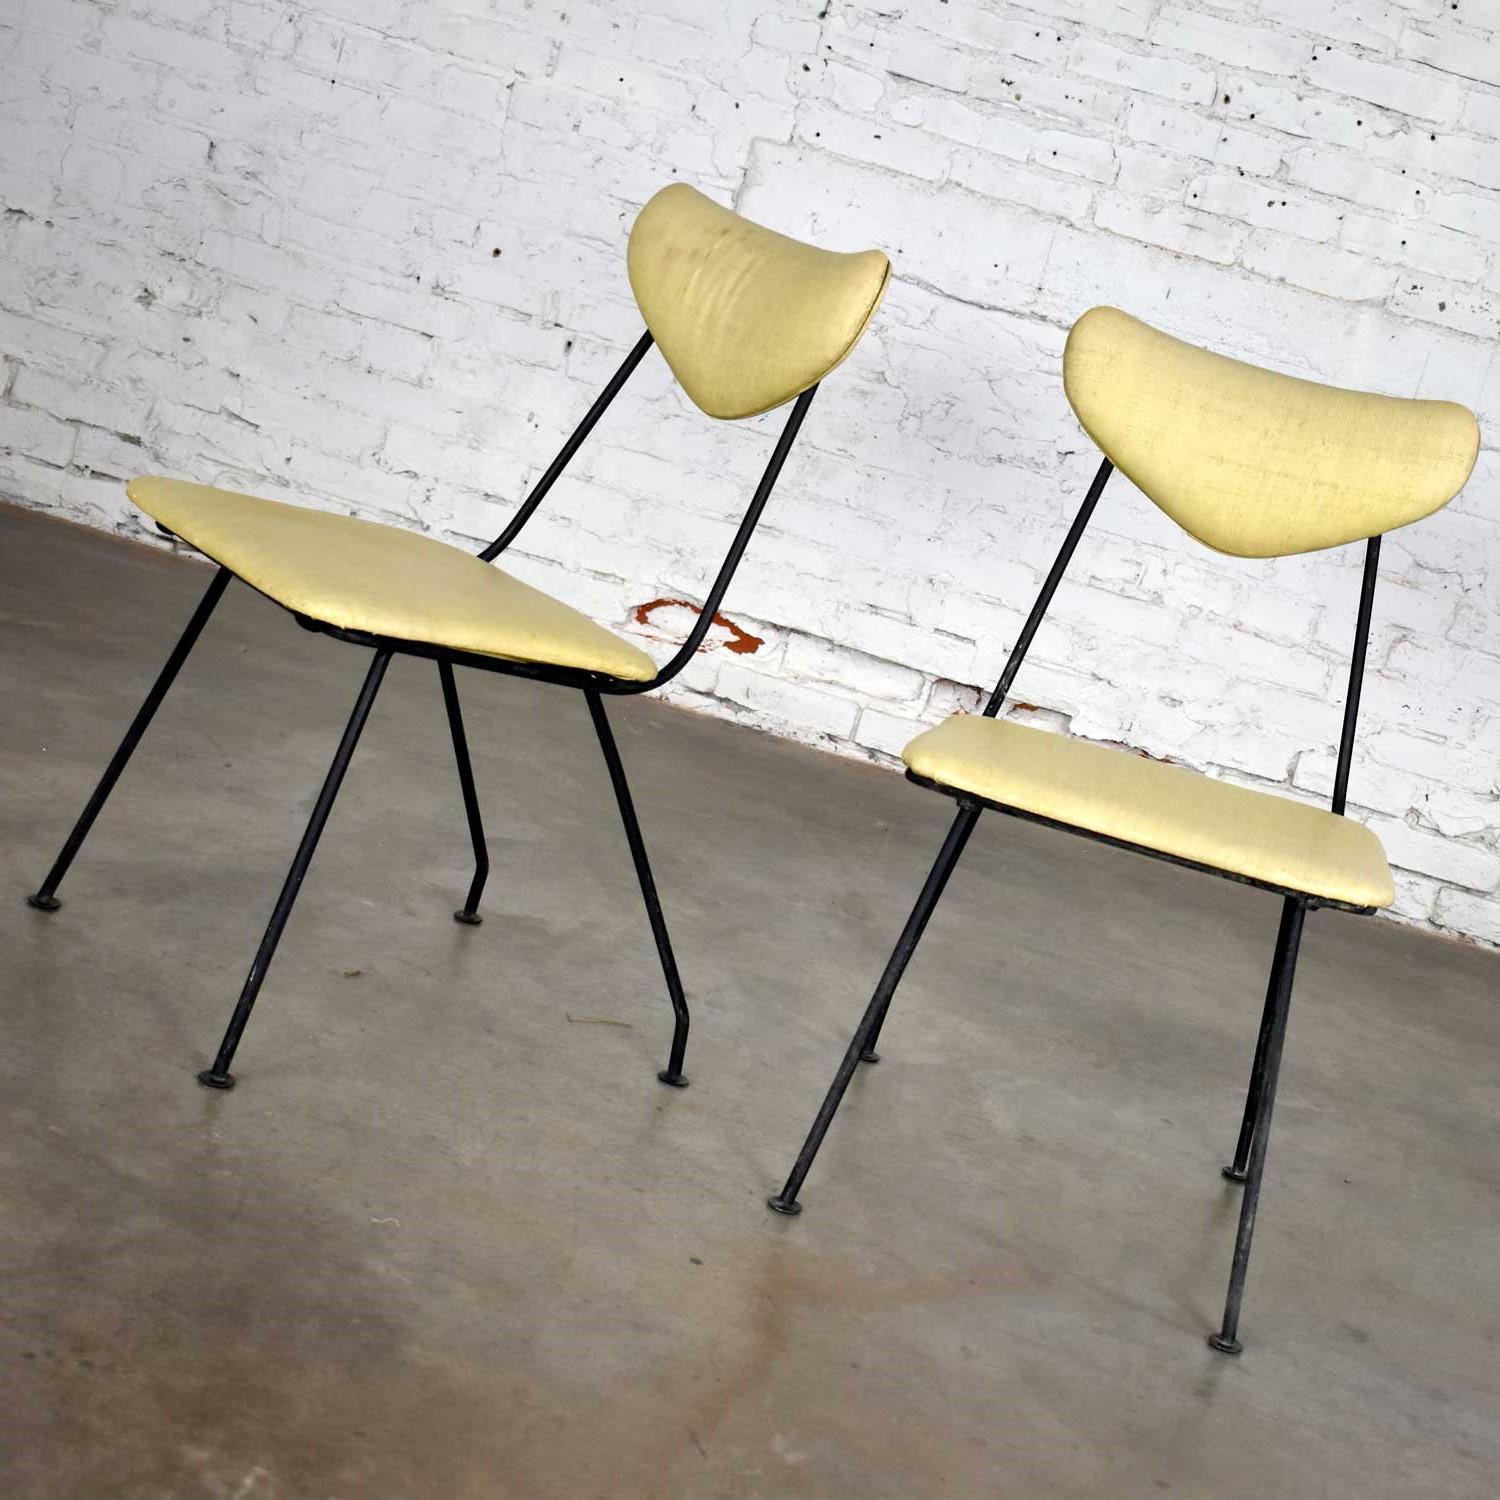 Lovely pair of Mid-Century Modern Neva-Rust patio dining chairs by Salterini comprised of their original yellow linen looking textured vinyl or faux leather fabric and black painted wrought iron frame. Beautiful condition with wear as you would